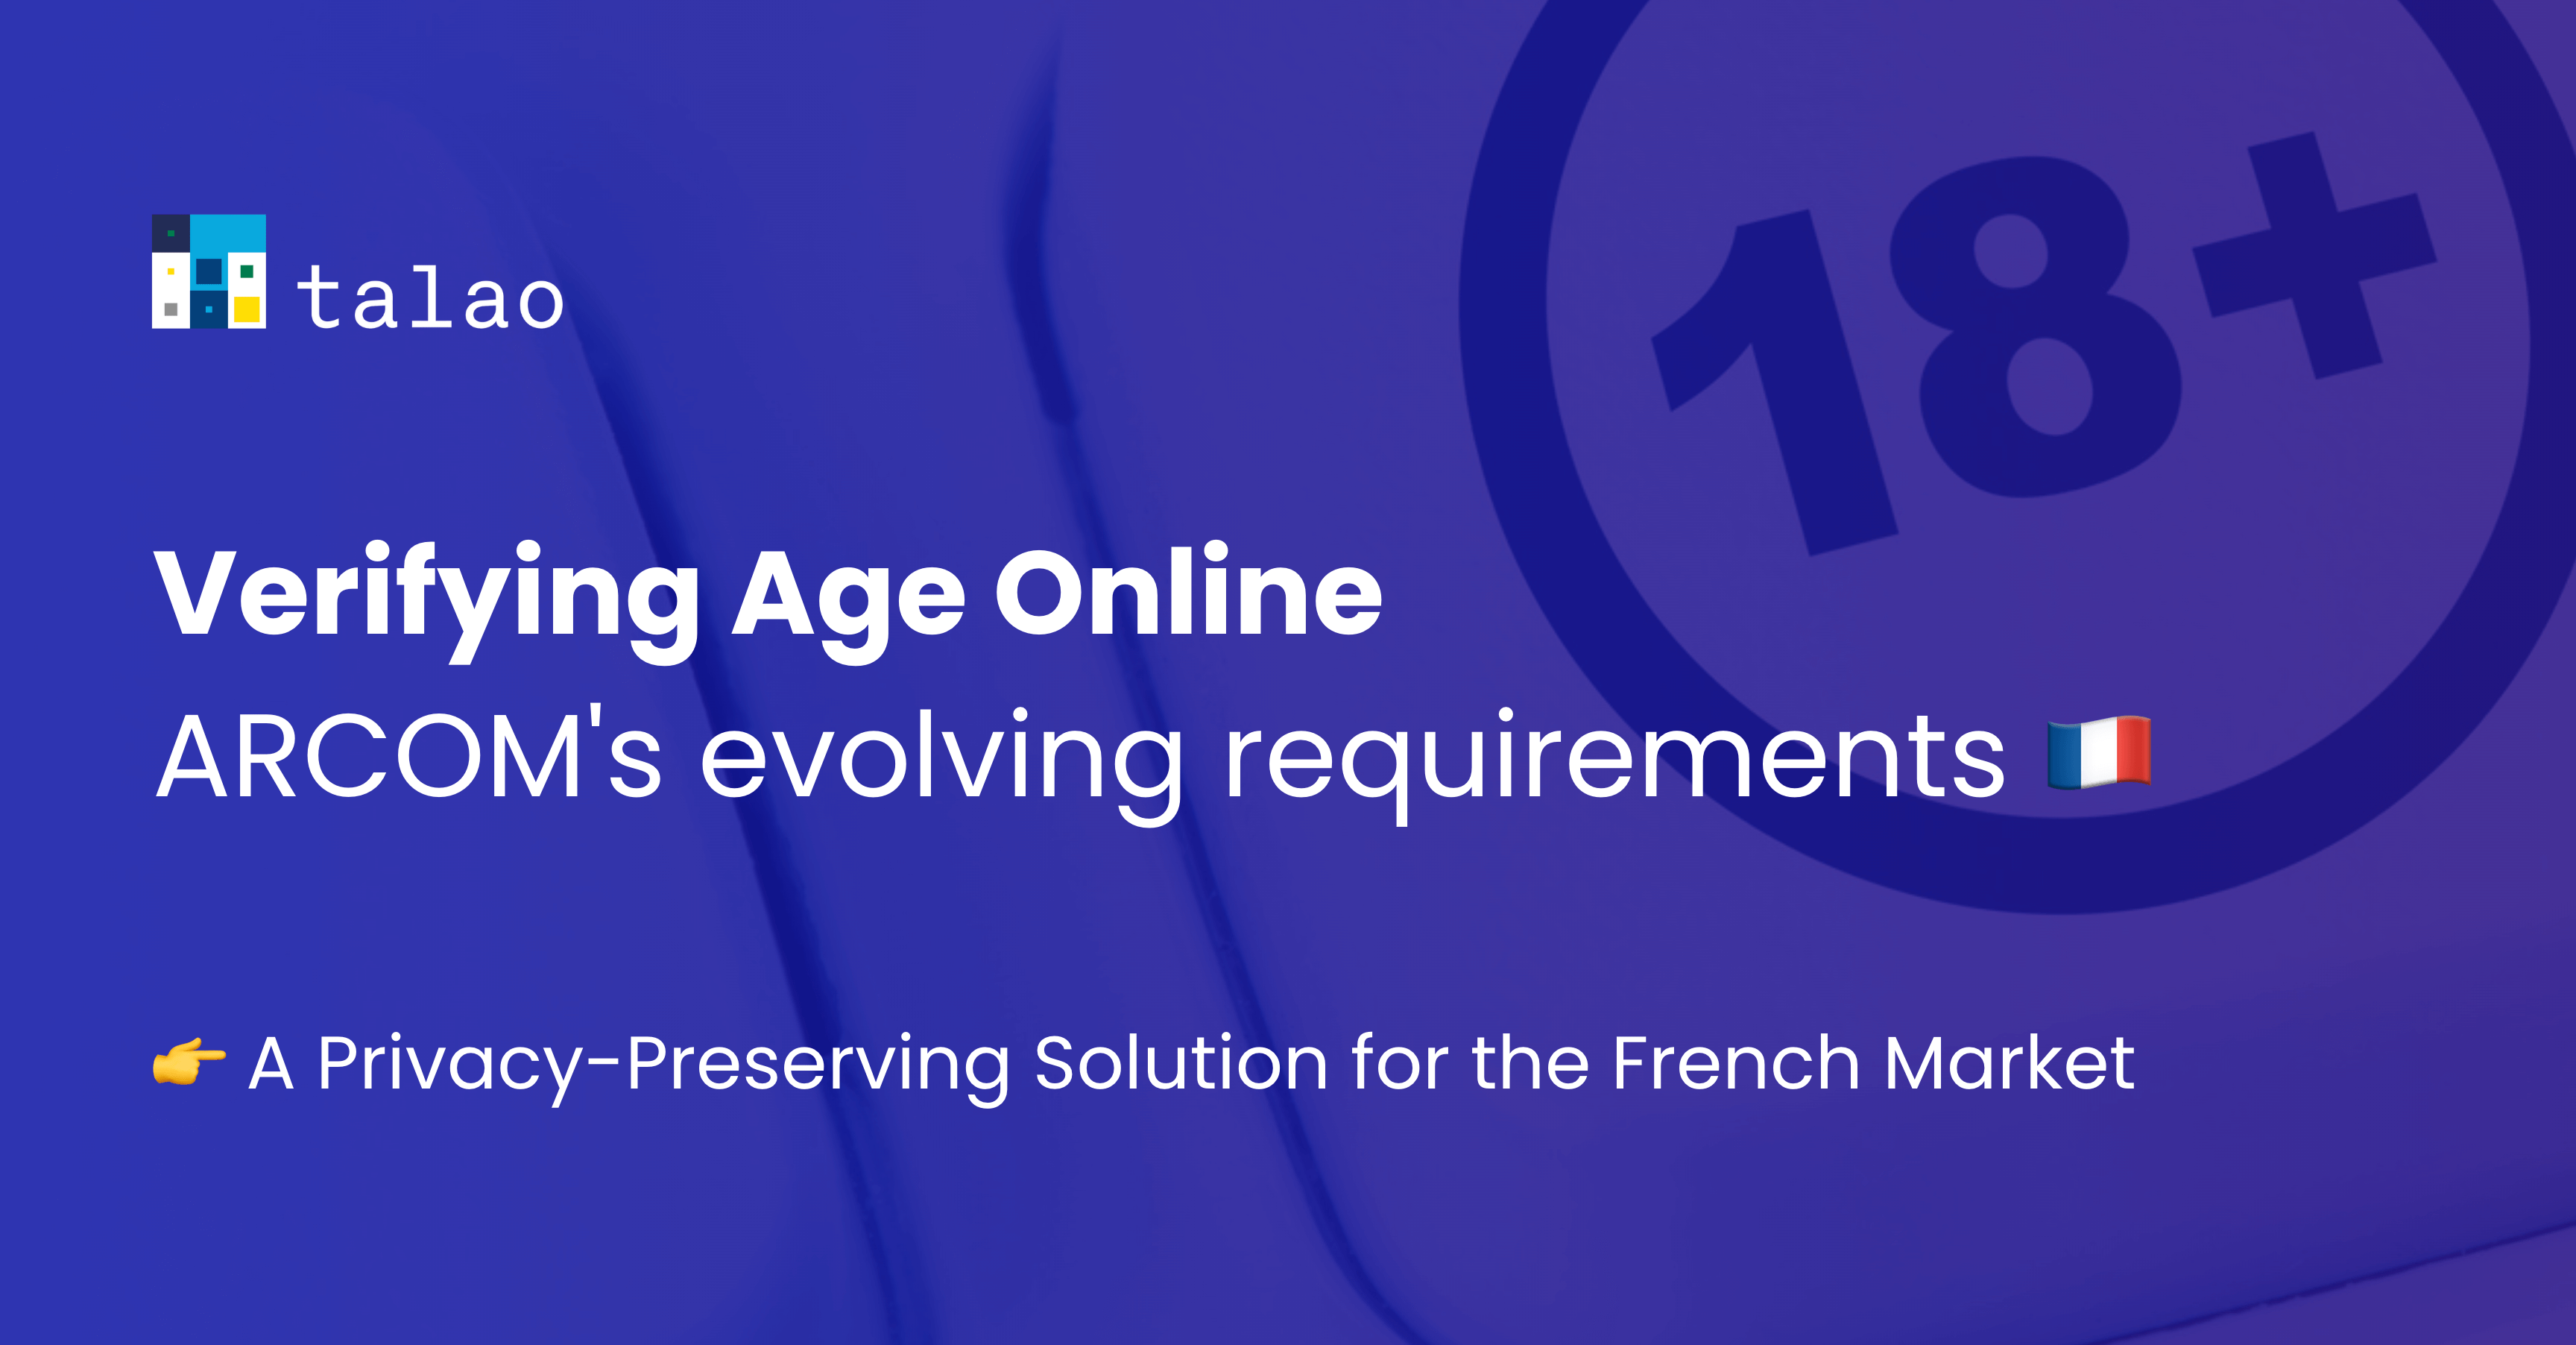 Verifying age online following ARCOM's evolving requirements